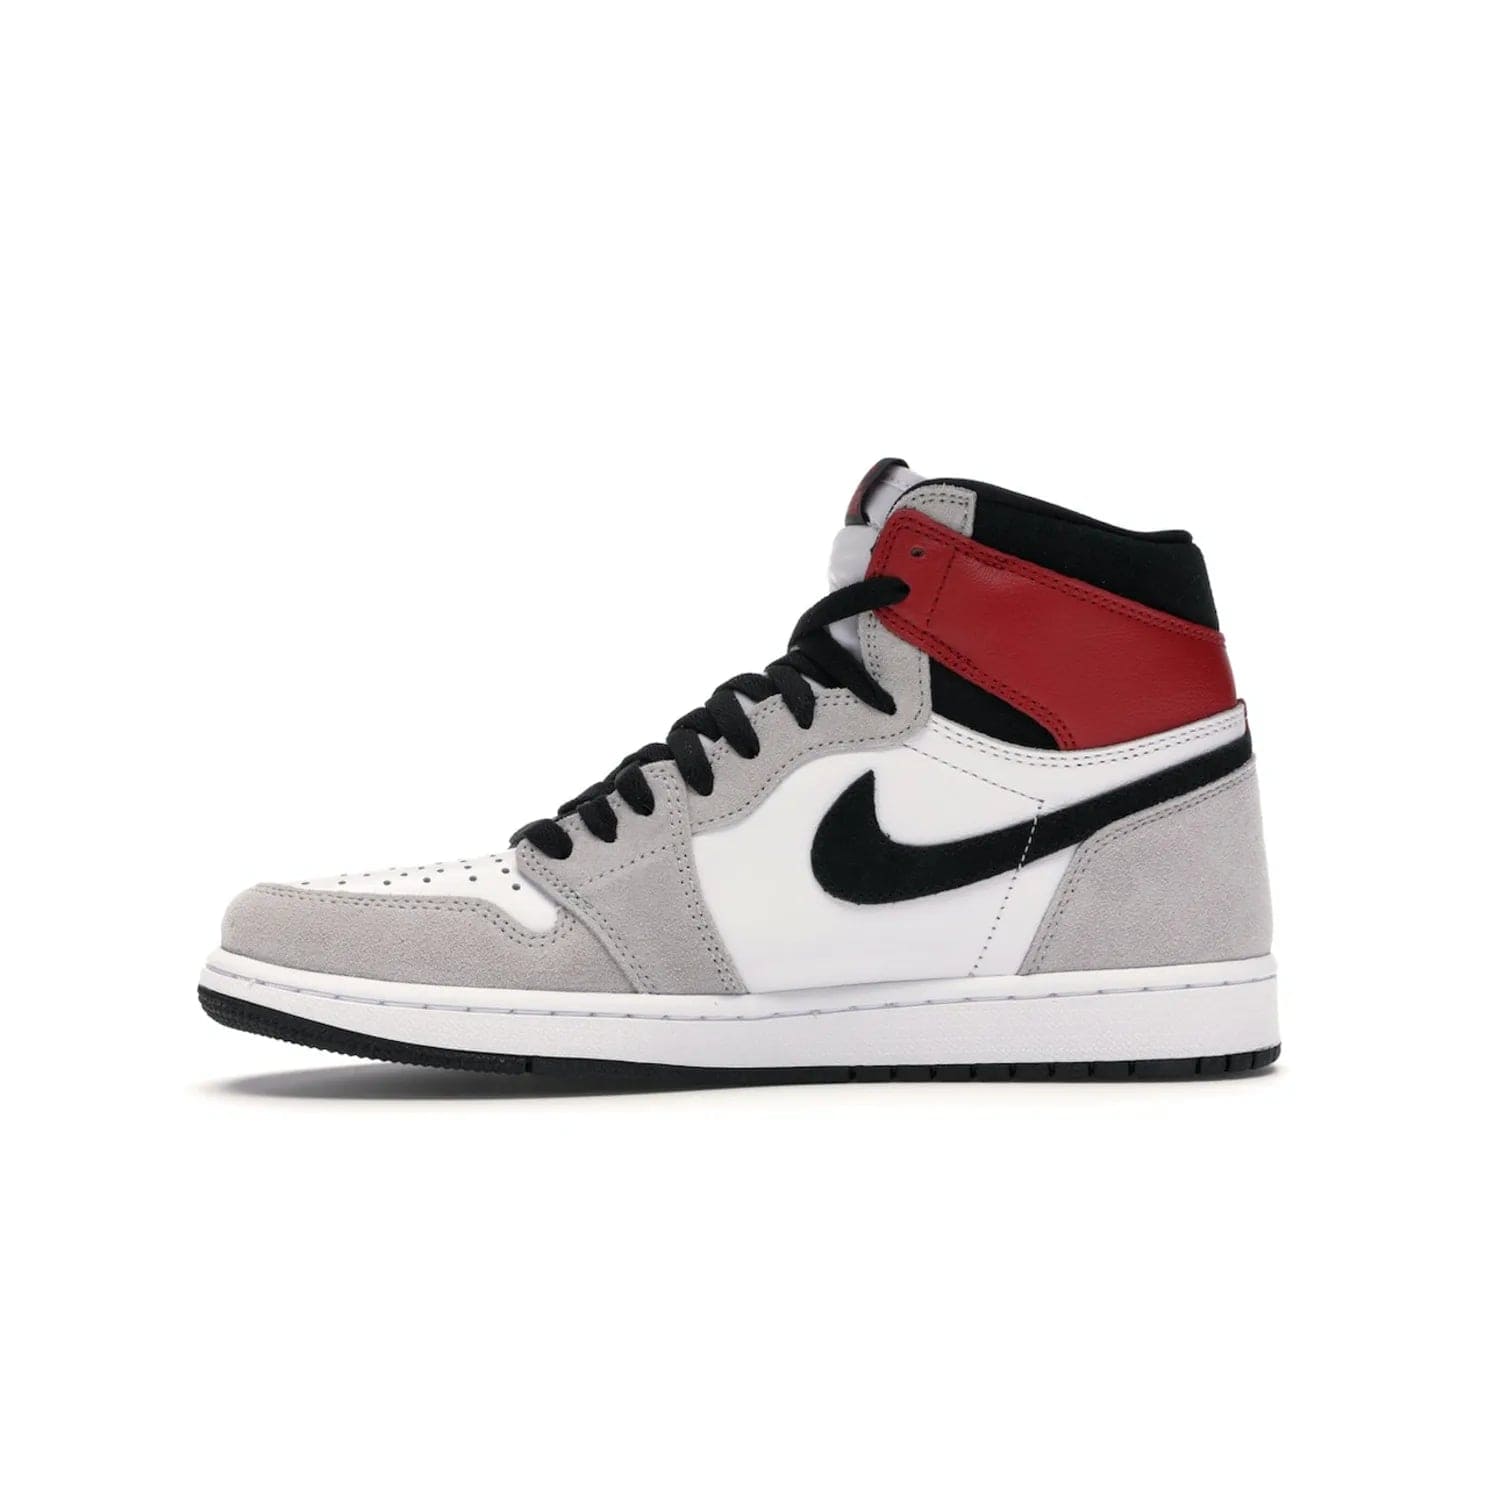 Jordan 1 Retro High Light Smoke Grey - Image 18 - Only at www.BallersClubKickz.com - Comfortable and stylish, Jordan 1 Retro High Light Smoke Grey offers a unique spin on a classic design. White leather, grey suede, red leather and black details are set on a white midsole and black outsole. Get the sneaker released in July 2020 and add a twist to your wardrobe.